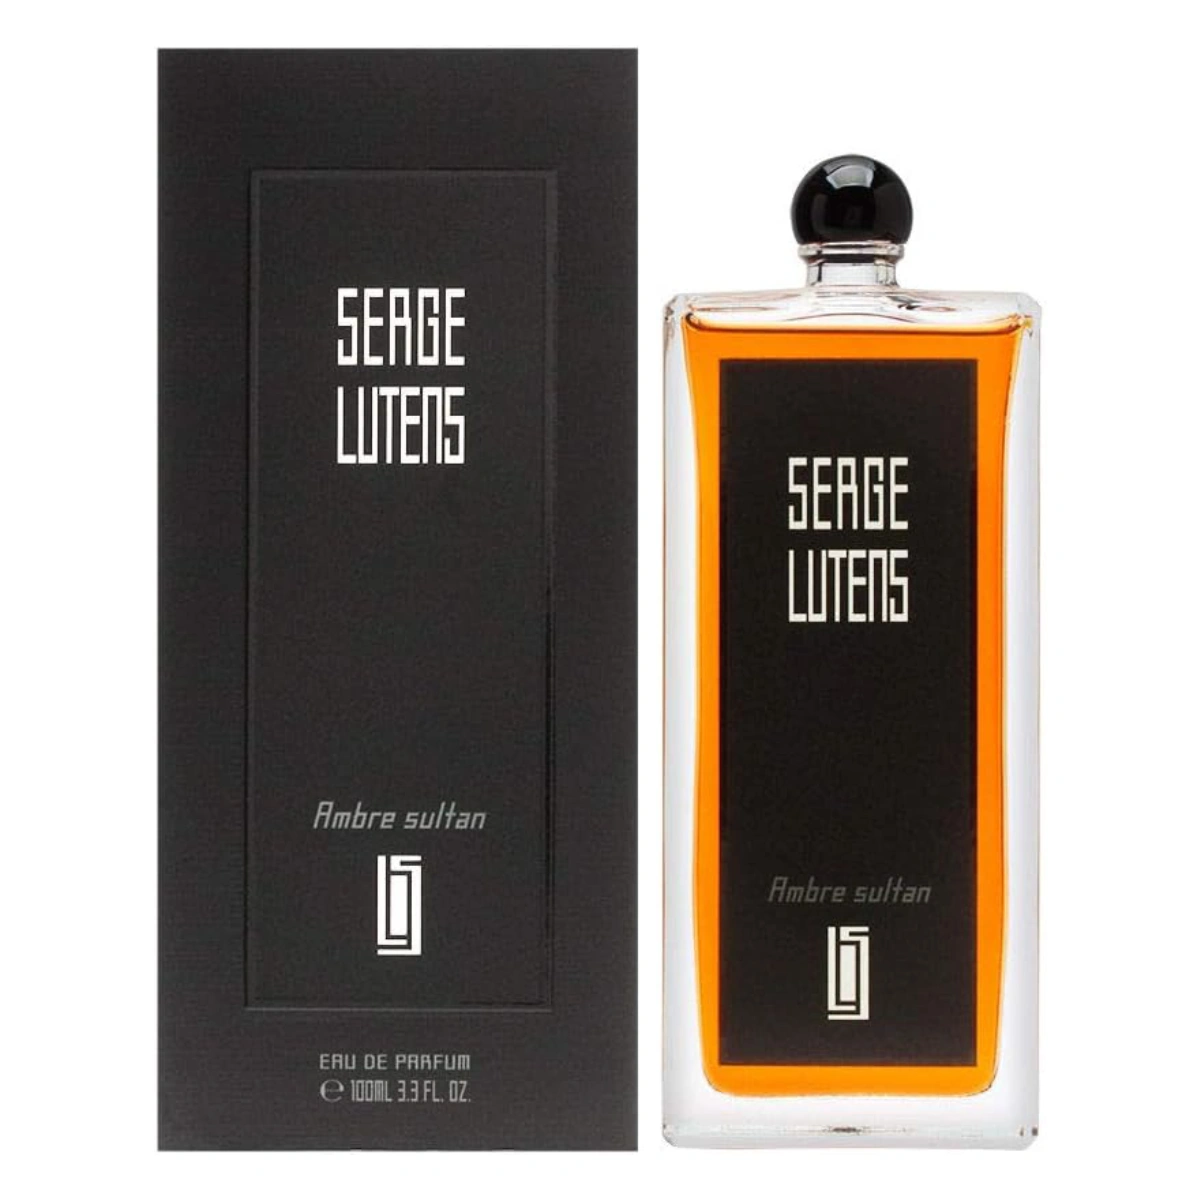 A bottle of Serge Lutens Ambre Sultan perfume against a clean, white background